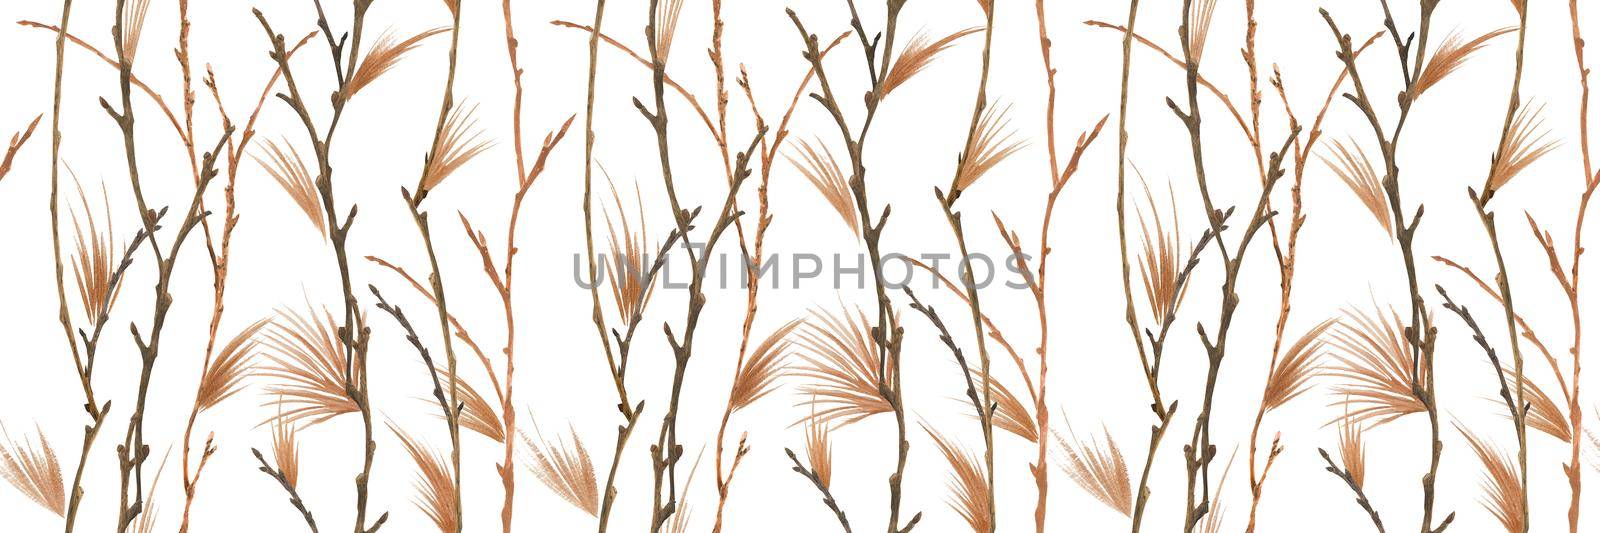 Winter forest watercolor seamless pattern, wide composition by Xeniasnowstorm